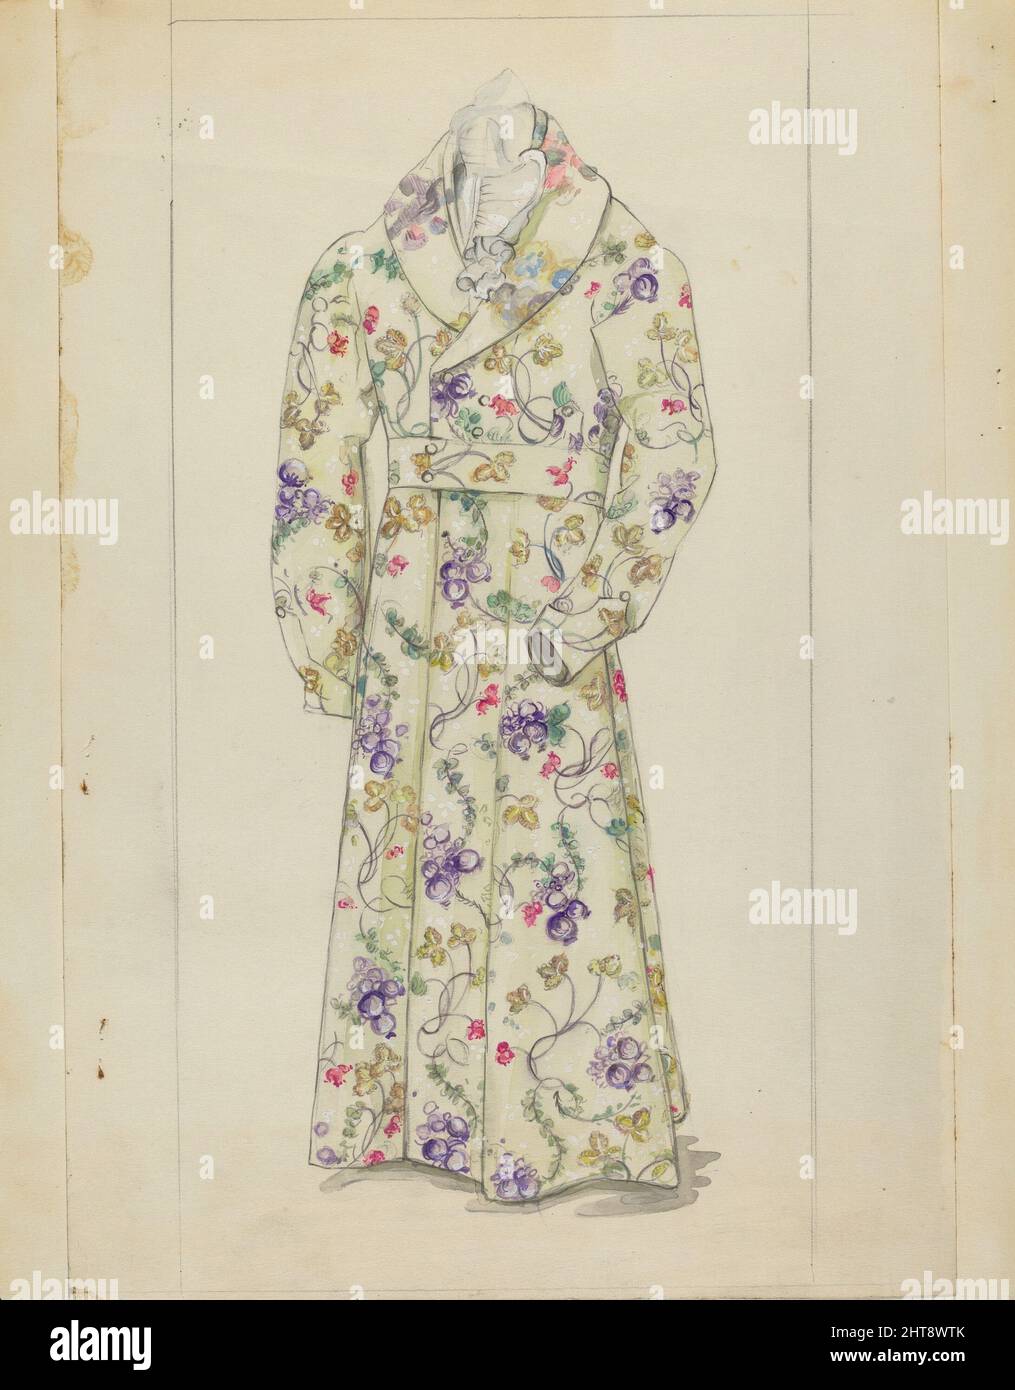 Man's Dressing Gown, c. 1939. Stock Photo